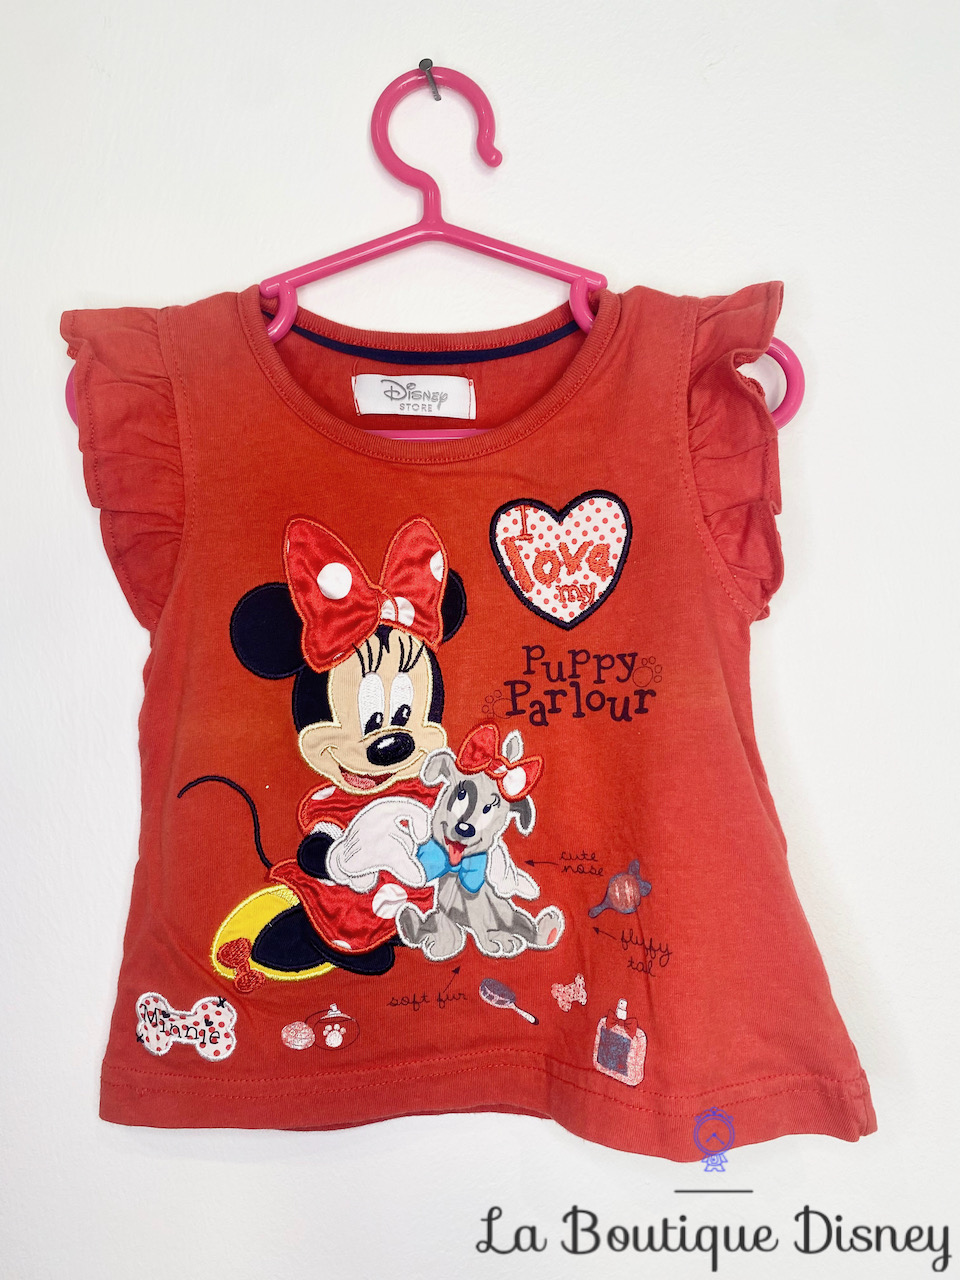 Tee shirt Minnie Mouse Puppy Parlour Disney Store taille 12-18 mois rouge chien love